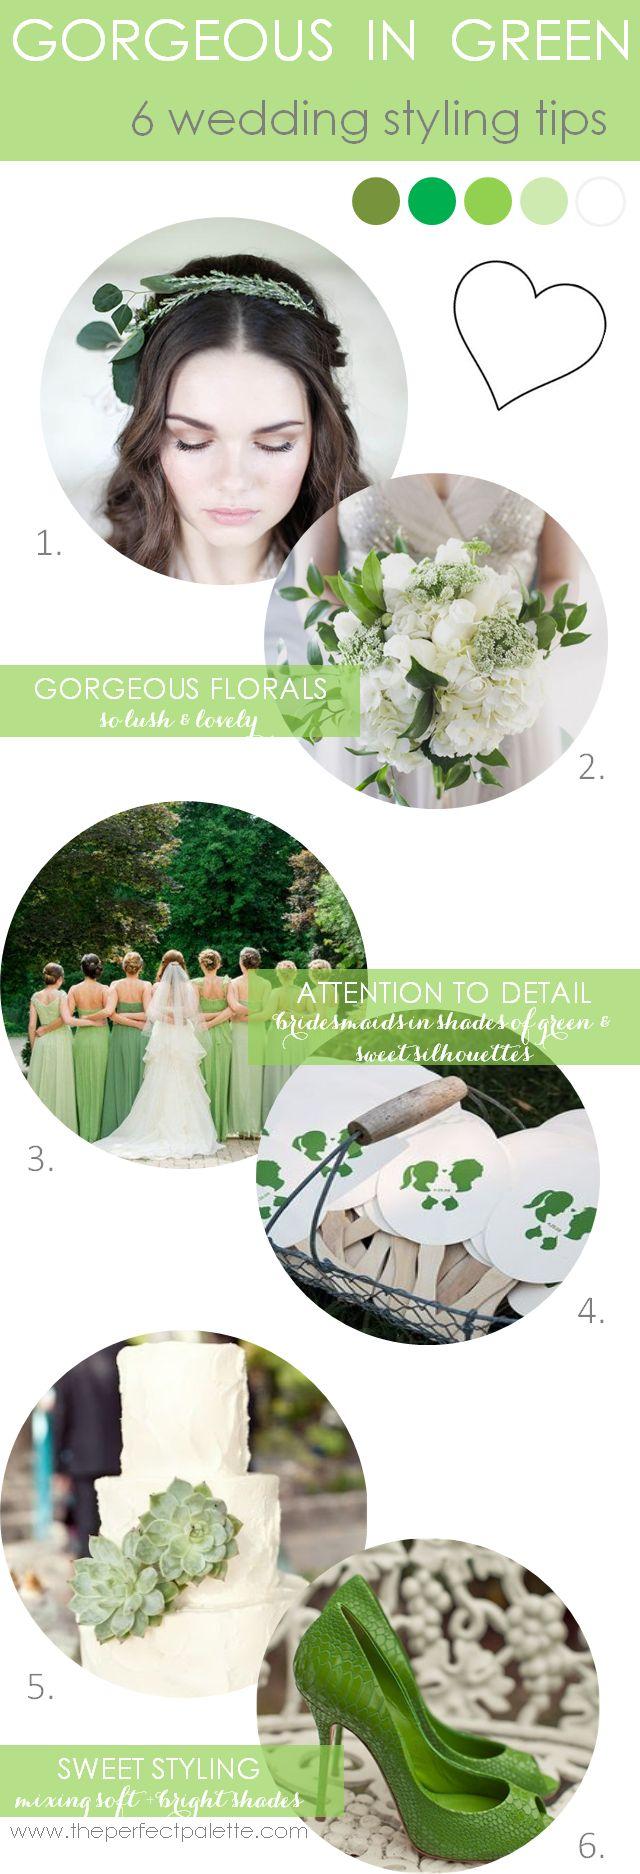 Wedding - Green Wedding Inspiration: Romantic, Ethereal, And Timeless